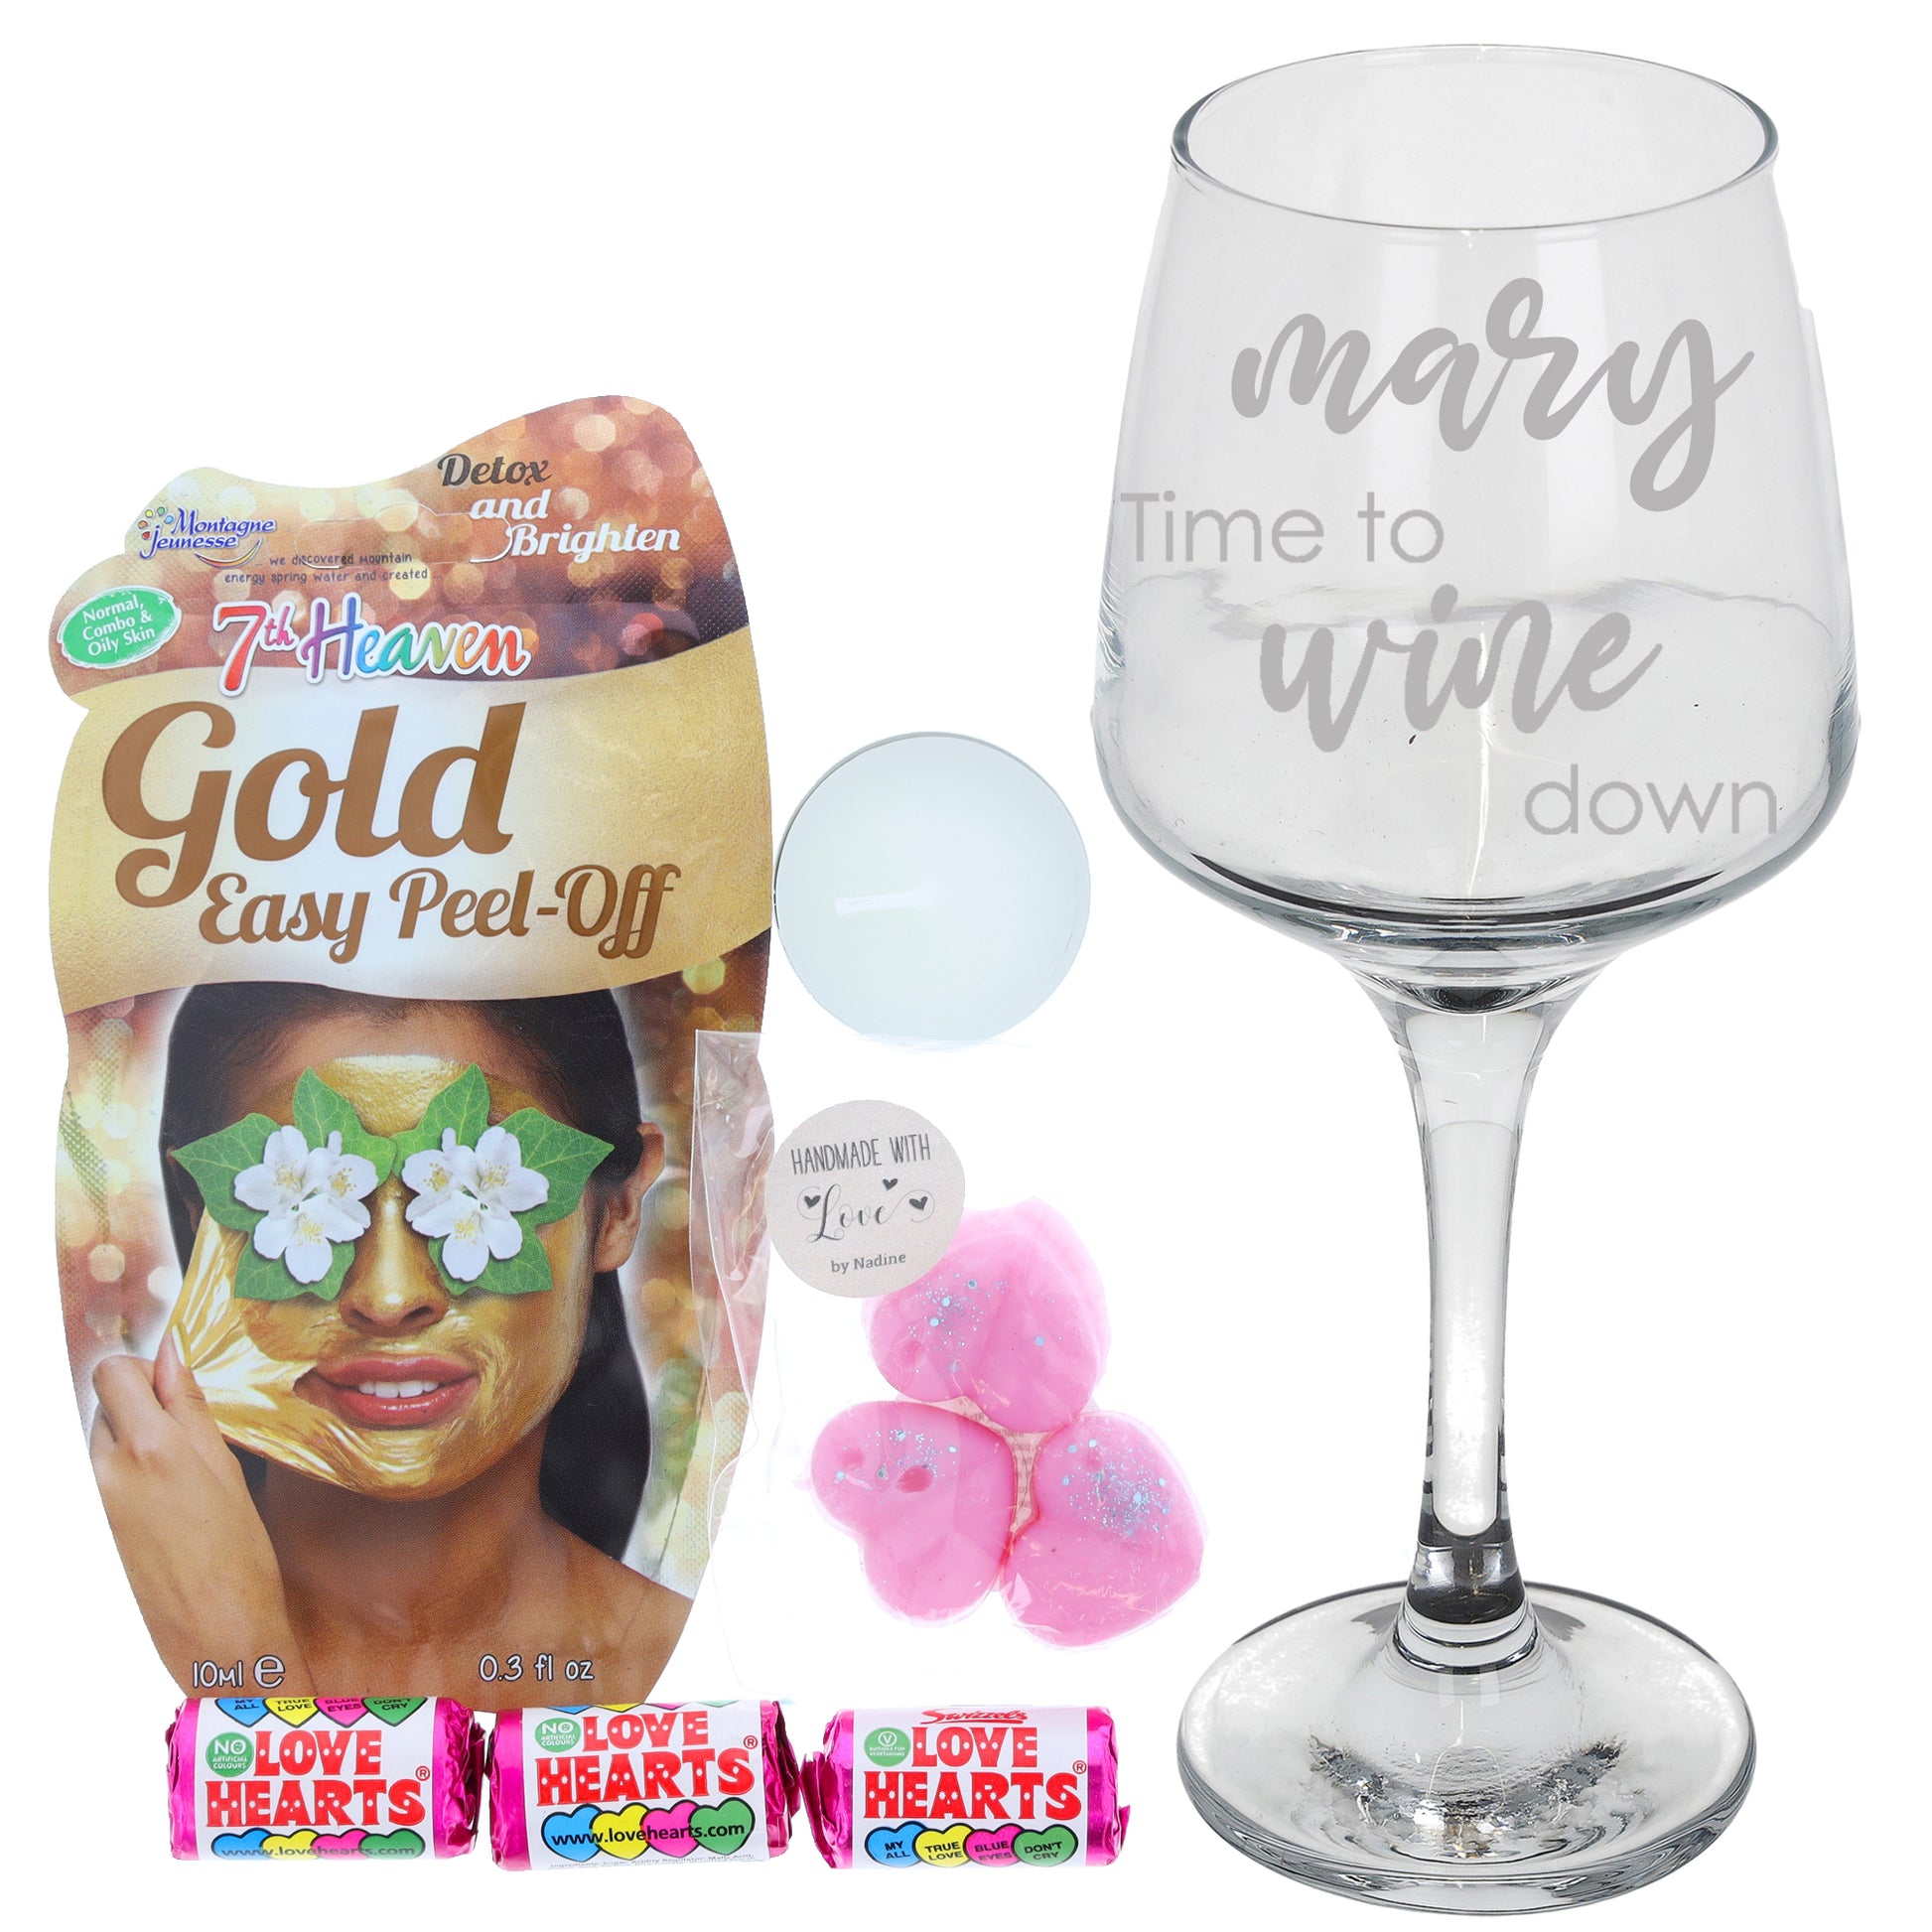 Personalised Engraved "Time To Wine Down" Wine Glass  - Always Looking Good -   